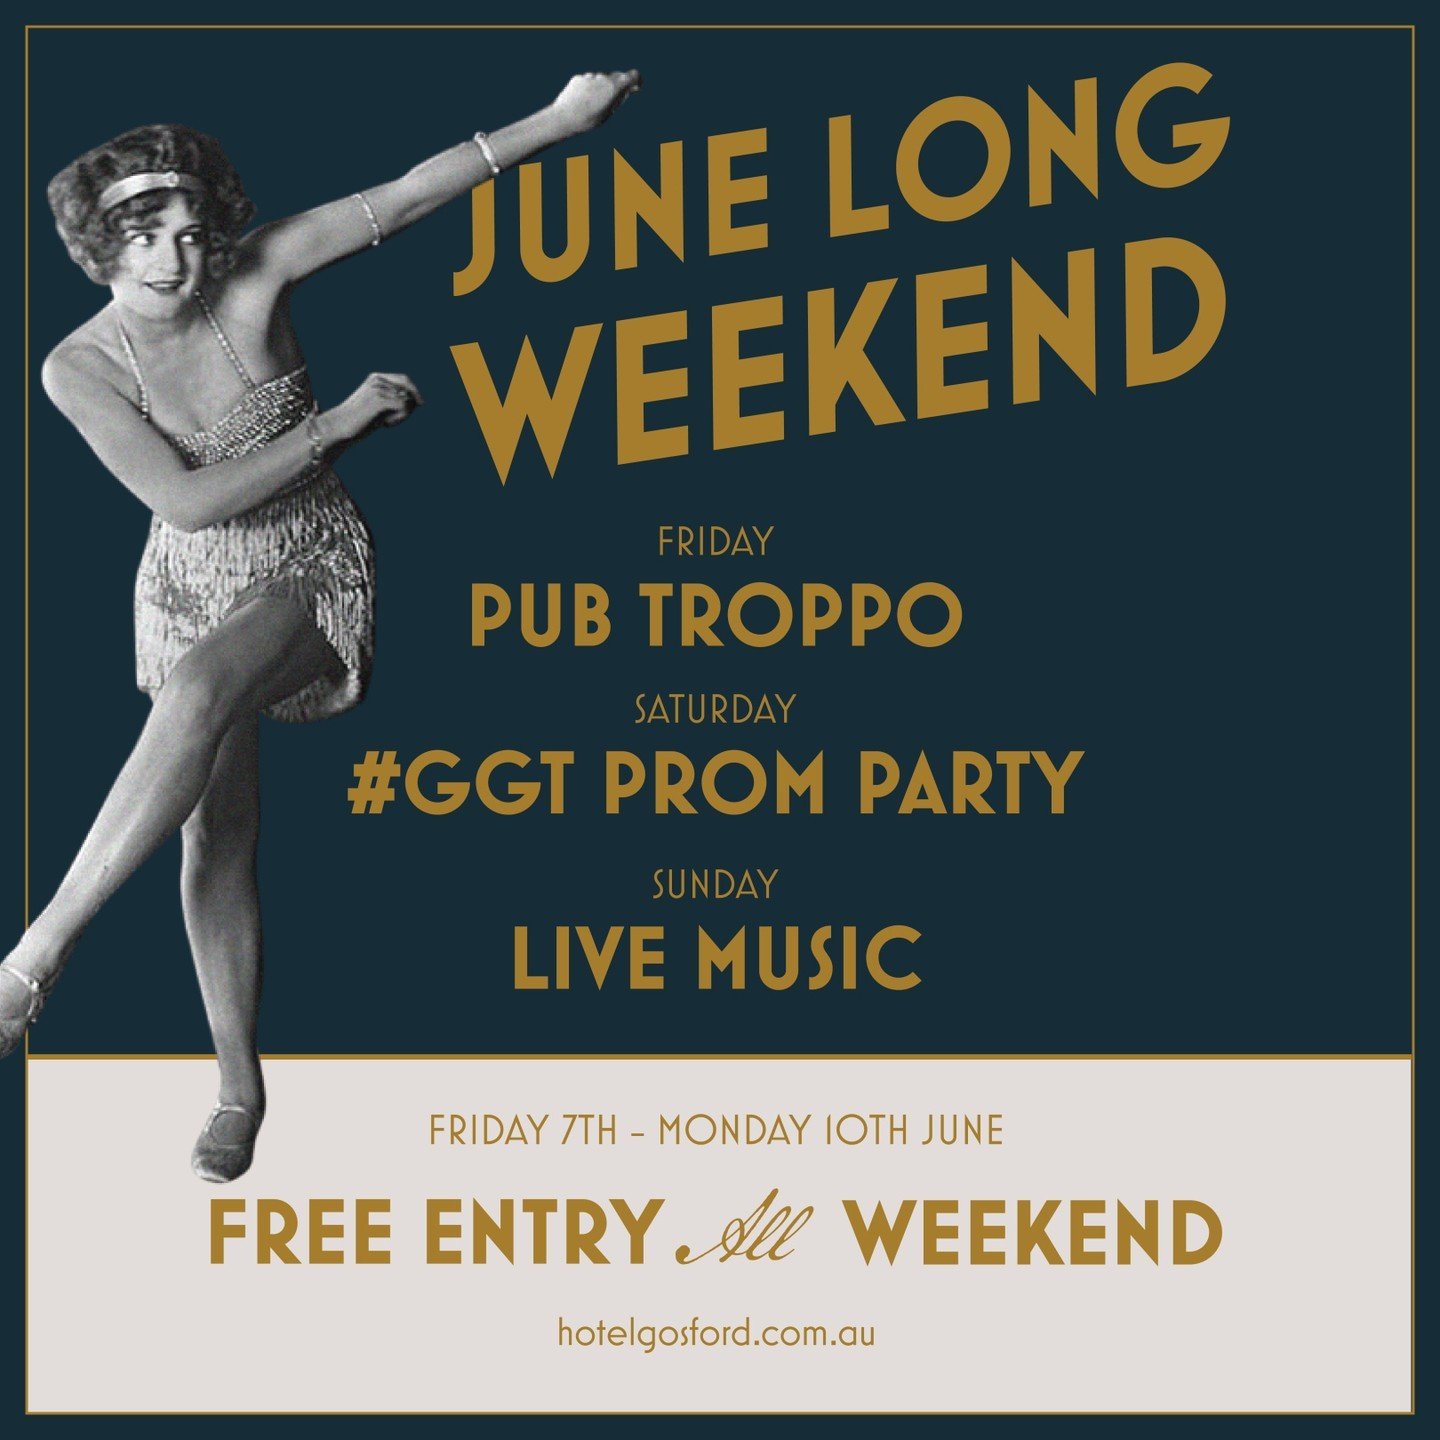 IYKYK. No one does a long weekend like Hotel Gosford - Check out what's happening this June long weekend: 

FRIDAY.  Pub Troppo retro DJ's &amp; karaoke 'til late!

SATURDAY. We're celebrating all you Coastie kings and queens at our @gossy.good.times